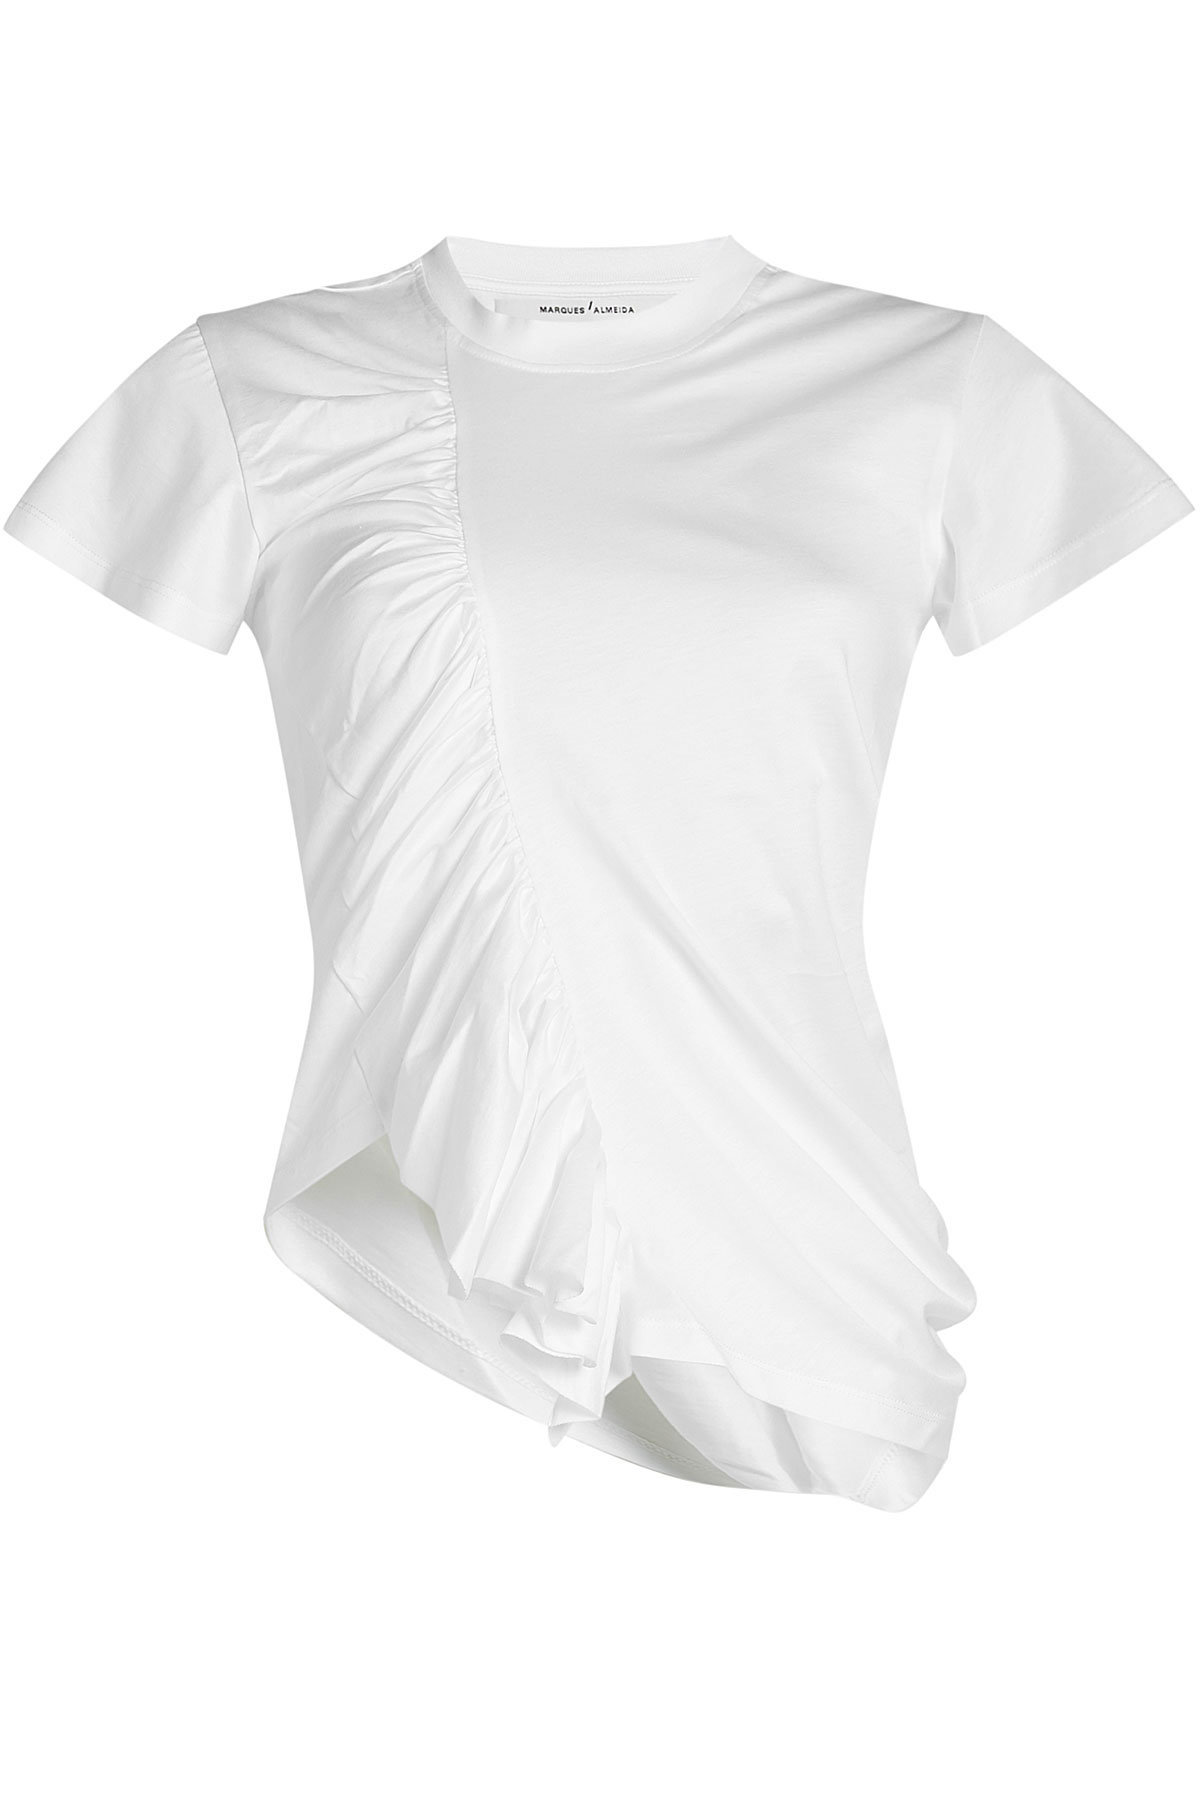 Marques' Almeida - Cotton T-Shirt with Gathered Ruffle